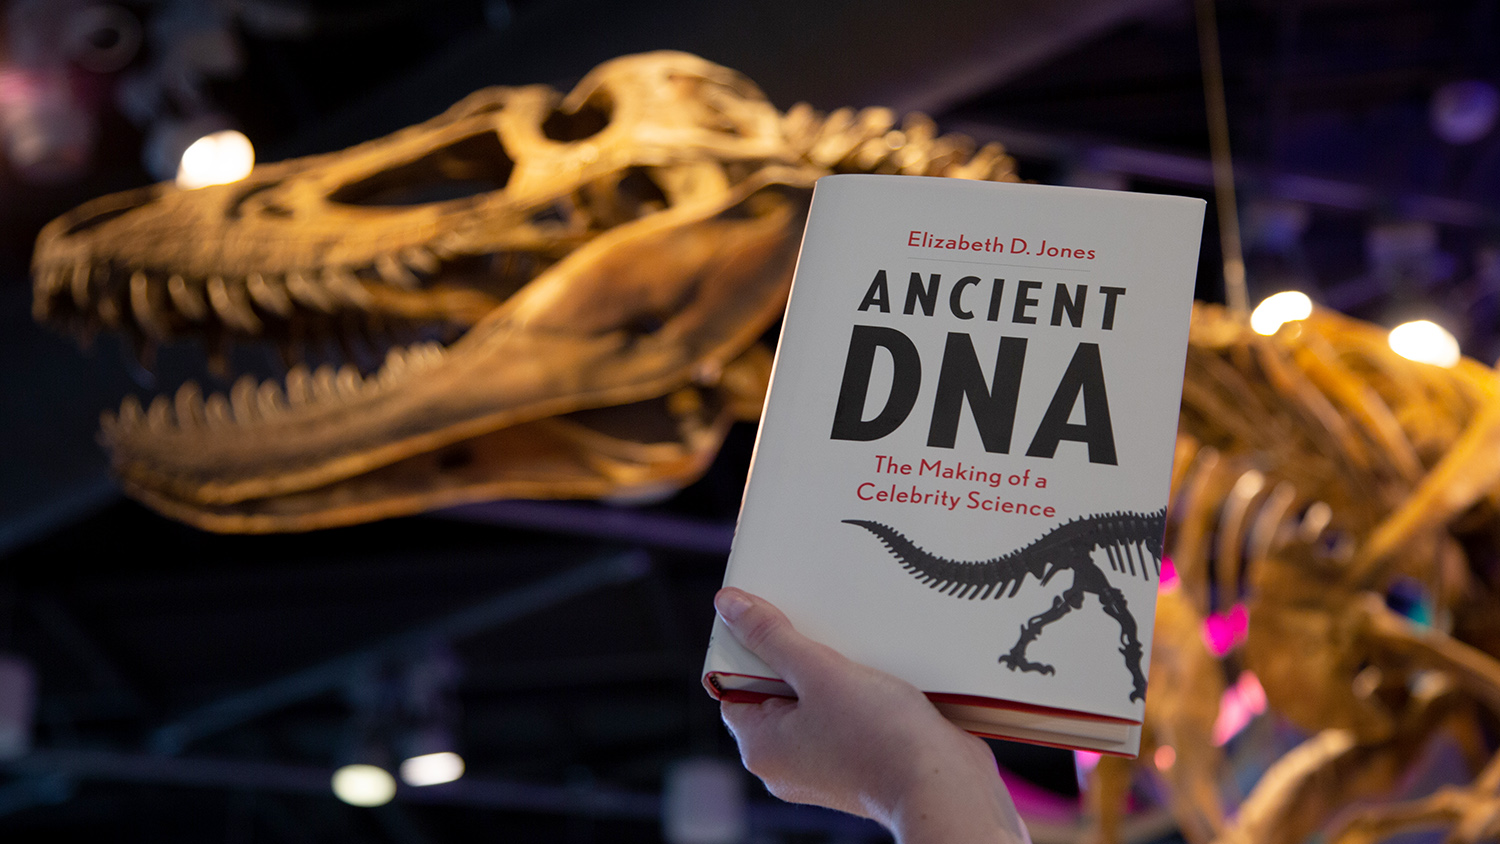 The cover of "Ancient DNA"